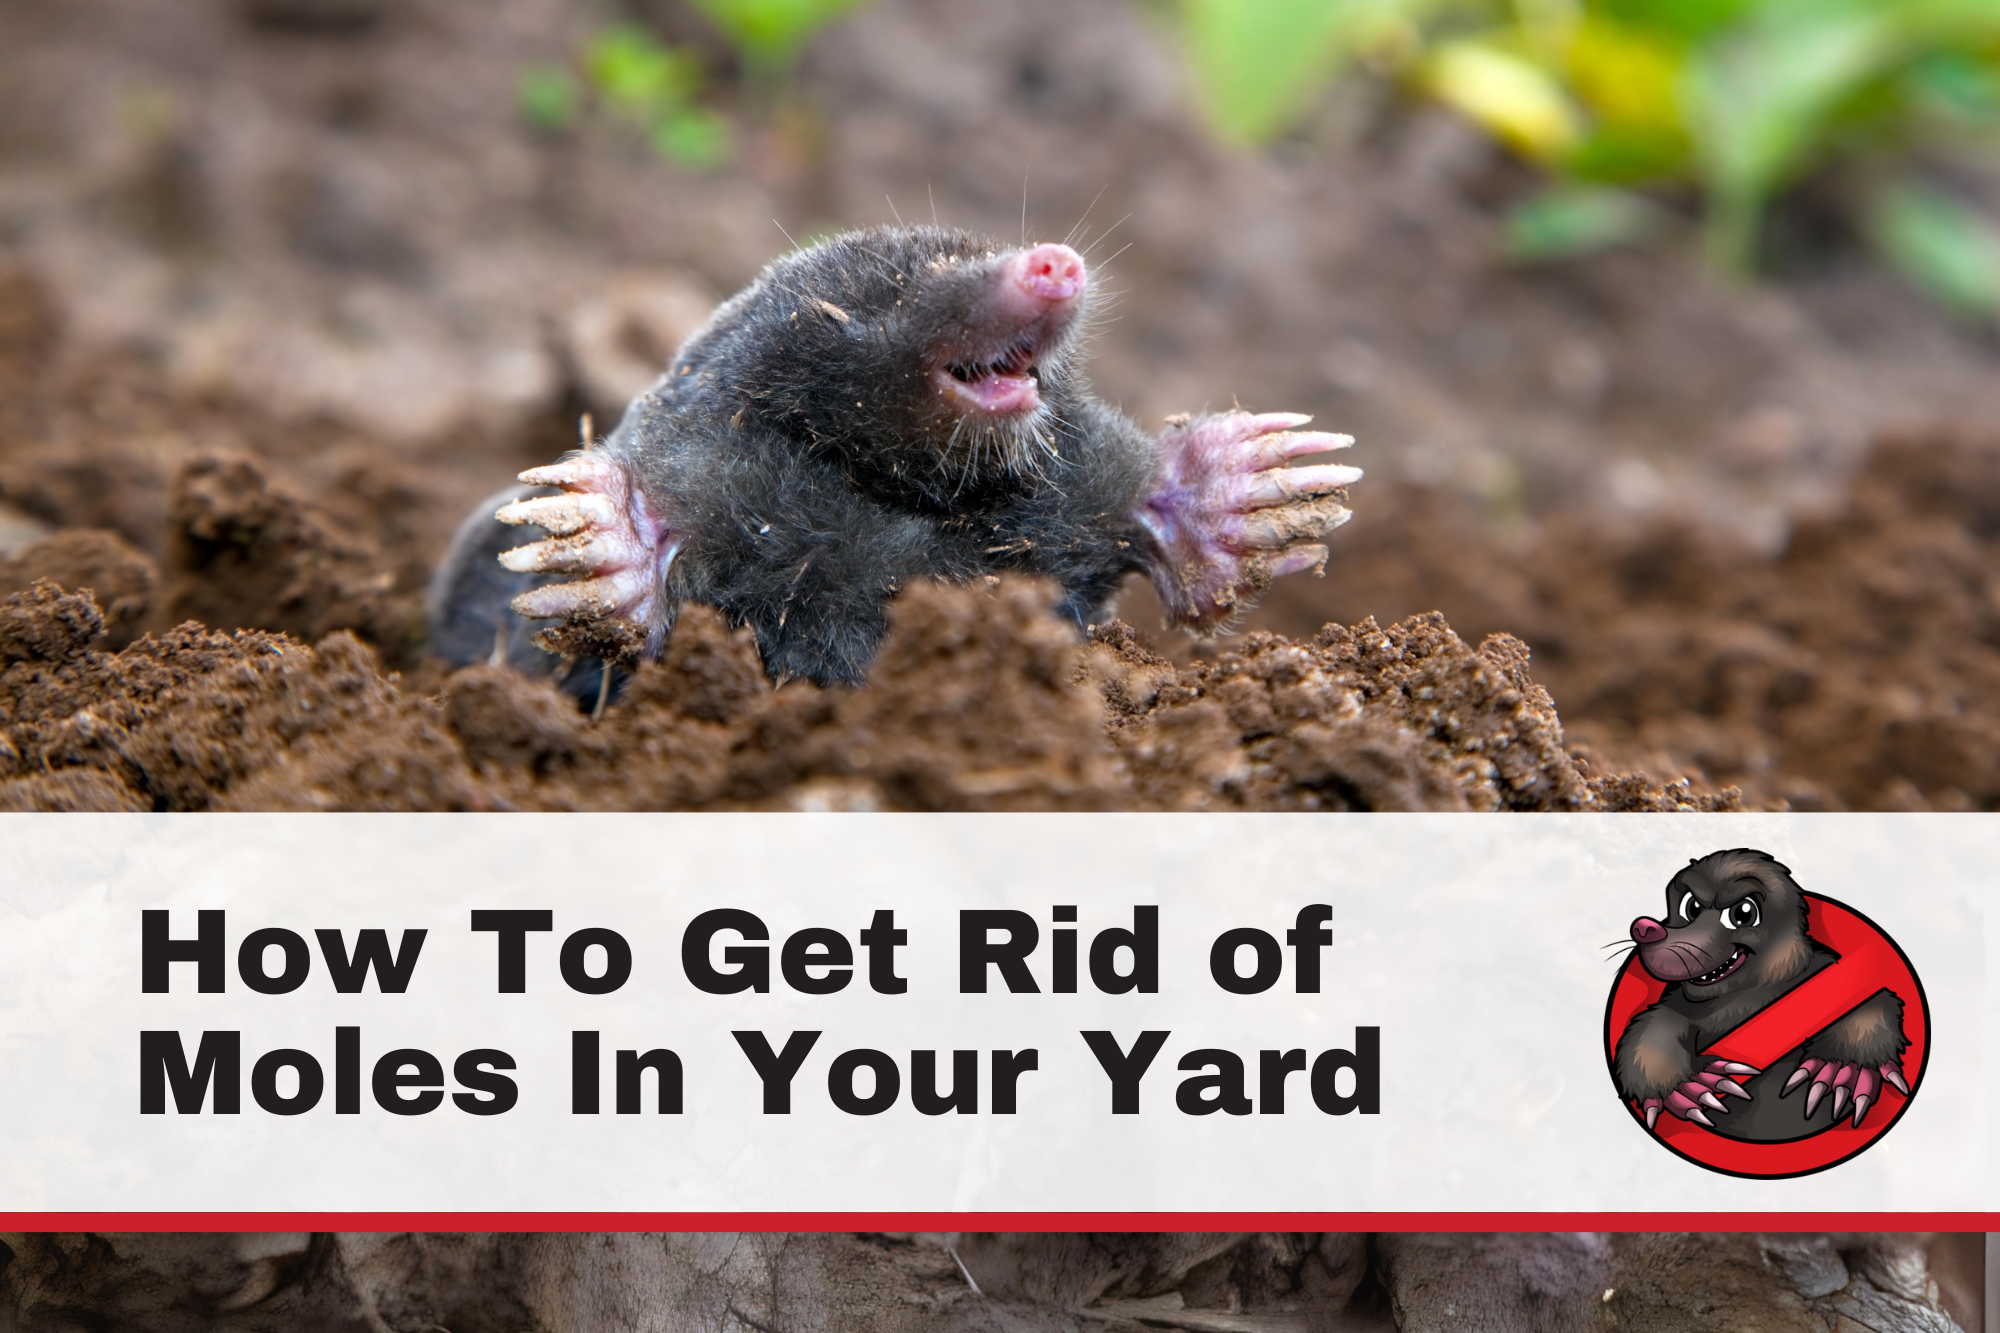 How To Get Rid of Moles In Your Yard